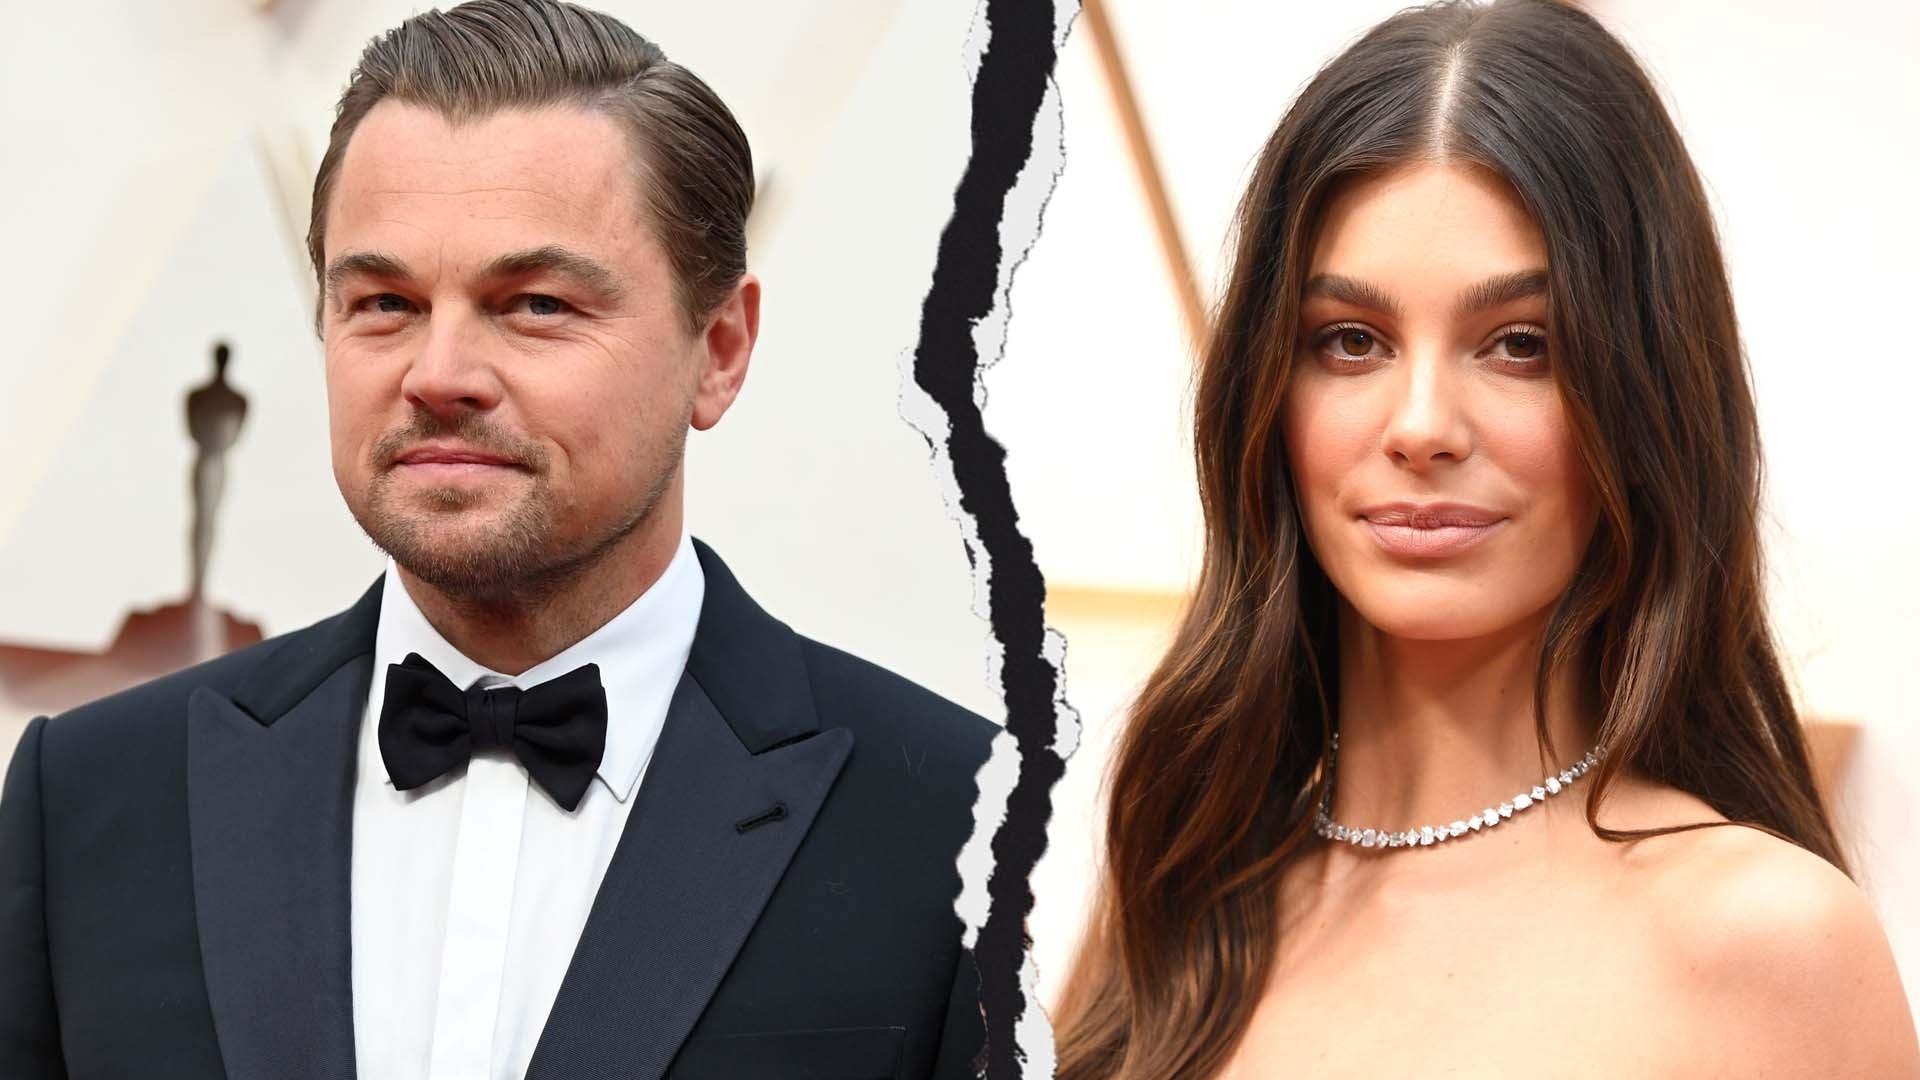 Leonardo DiCaprio and Girlfriend Camila Morrone Break Up After 4 Years Together (Source)